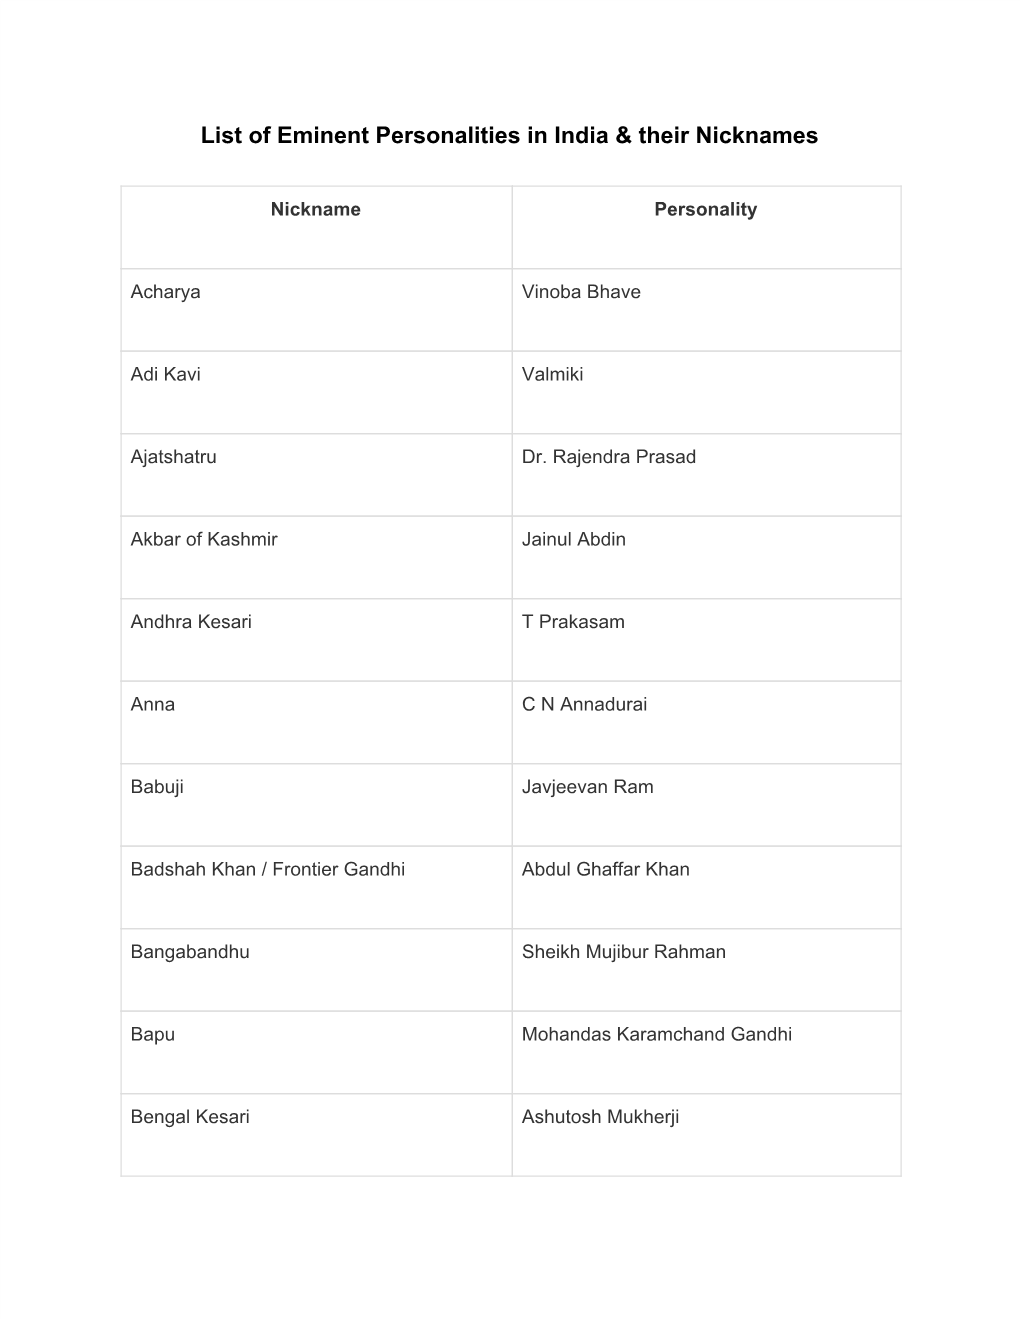 List of Eminent Personalities in India & Their Nicknames